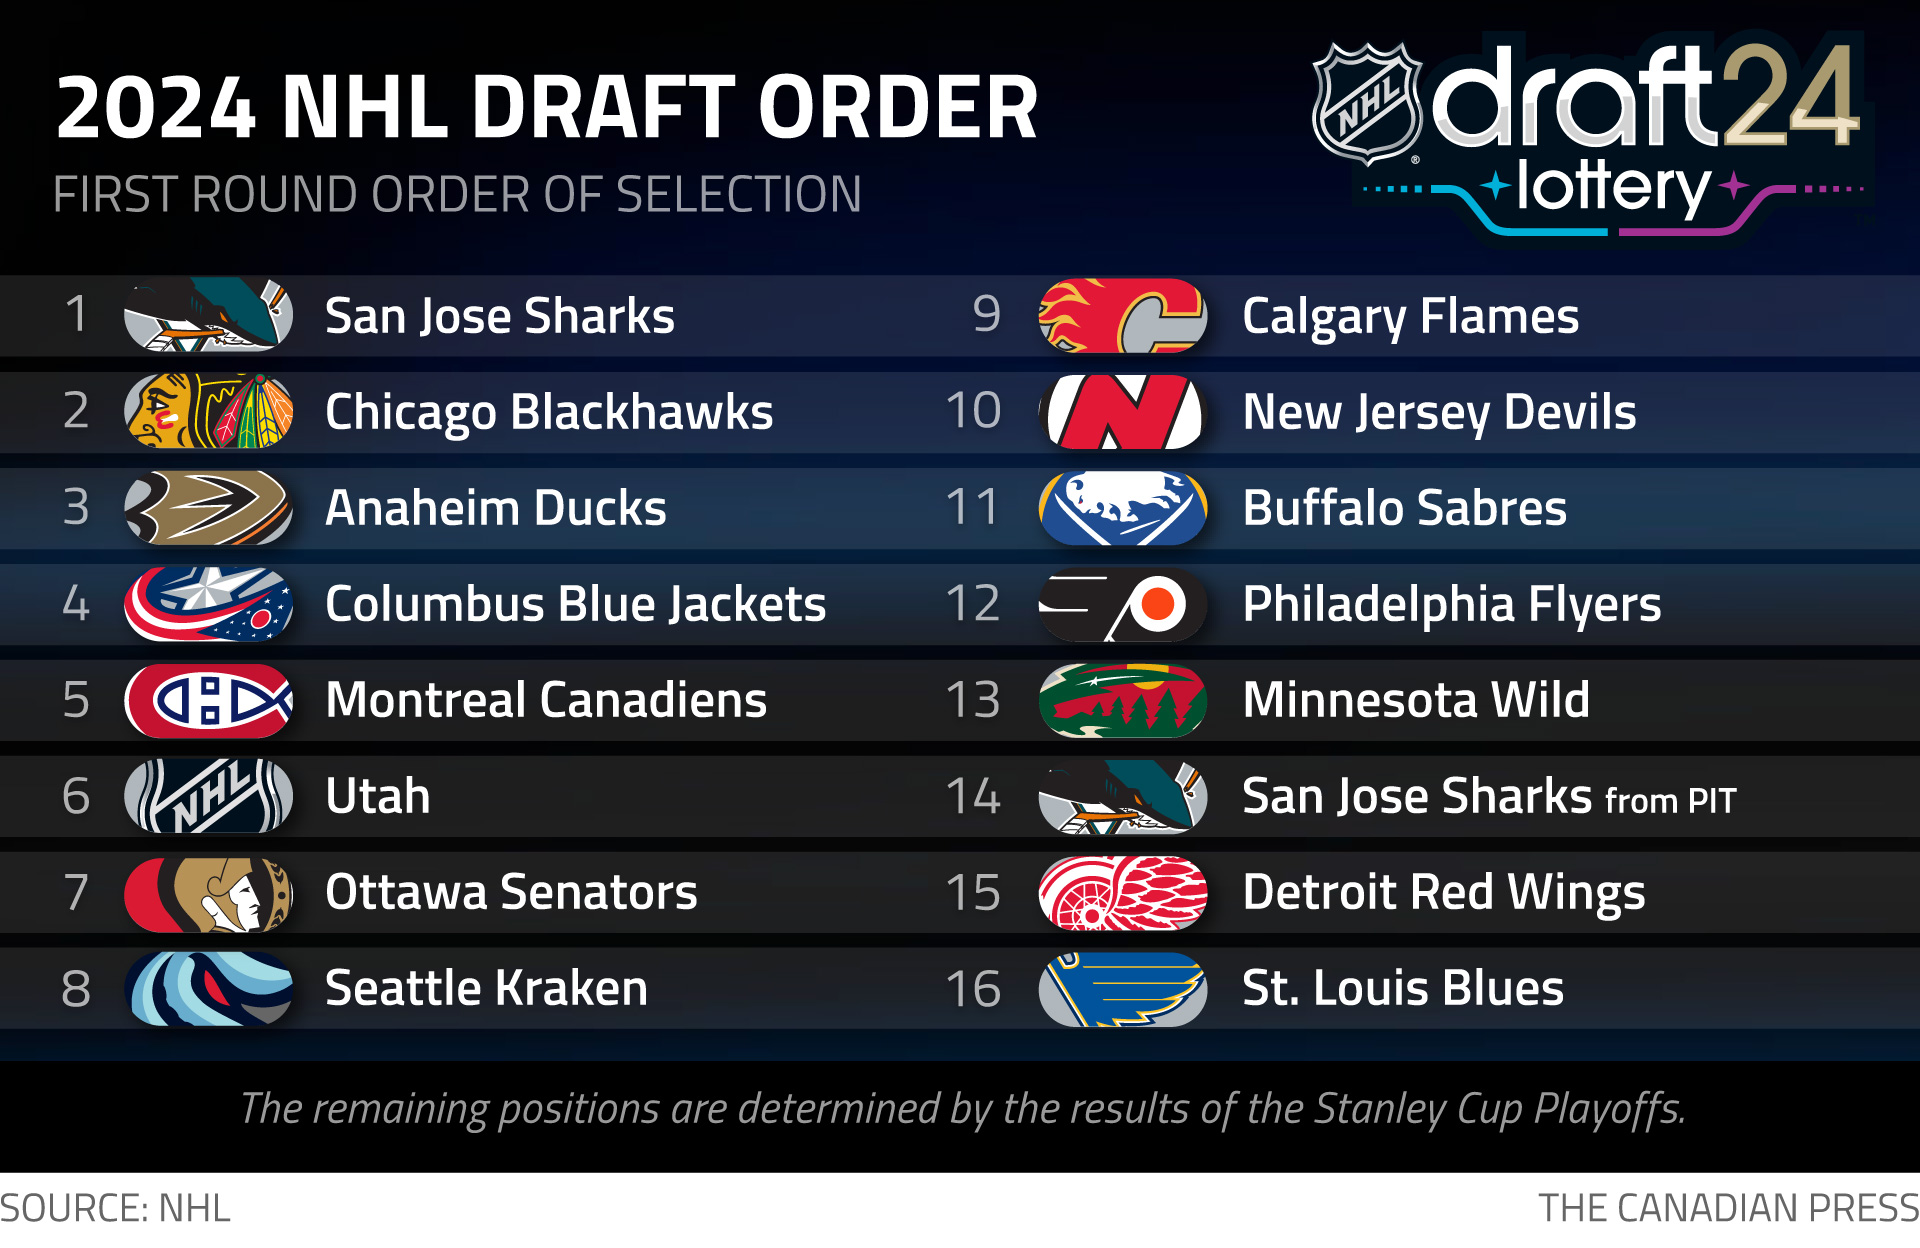 NHL Draft Lottery results